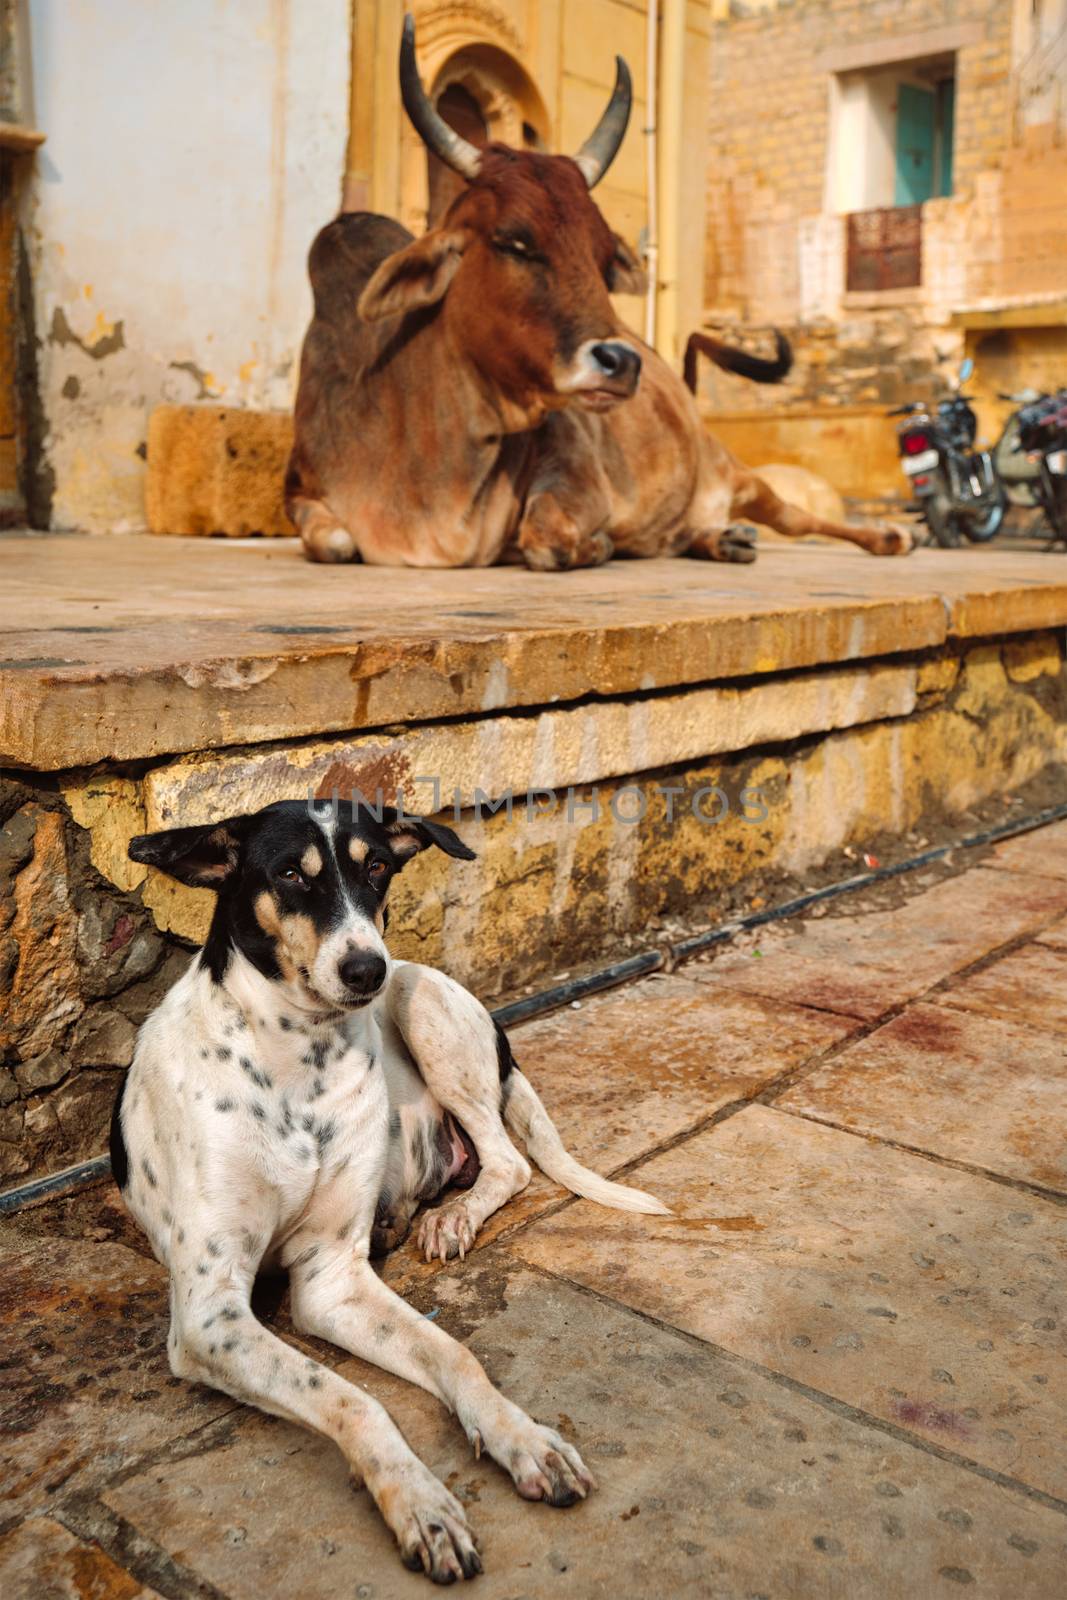 Indian cow and dog resting sleeping in the street. Cow is a sacred animal in India. Jasialmer fort, Rajasthan, India